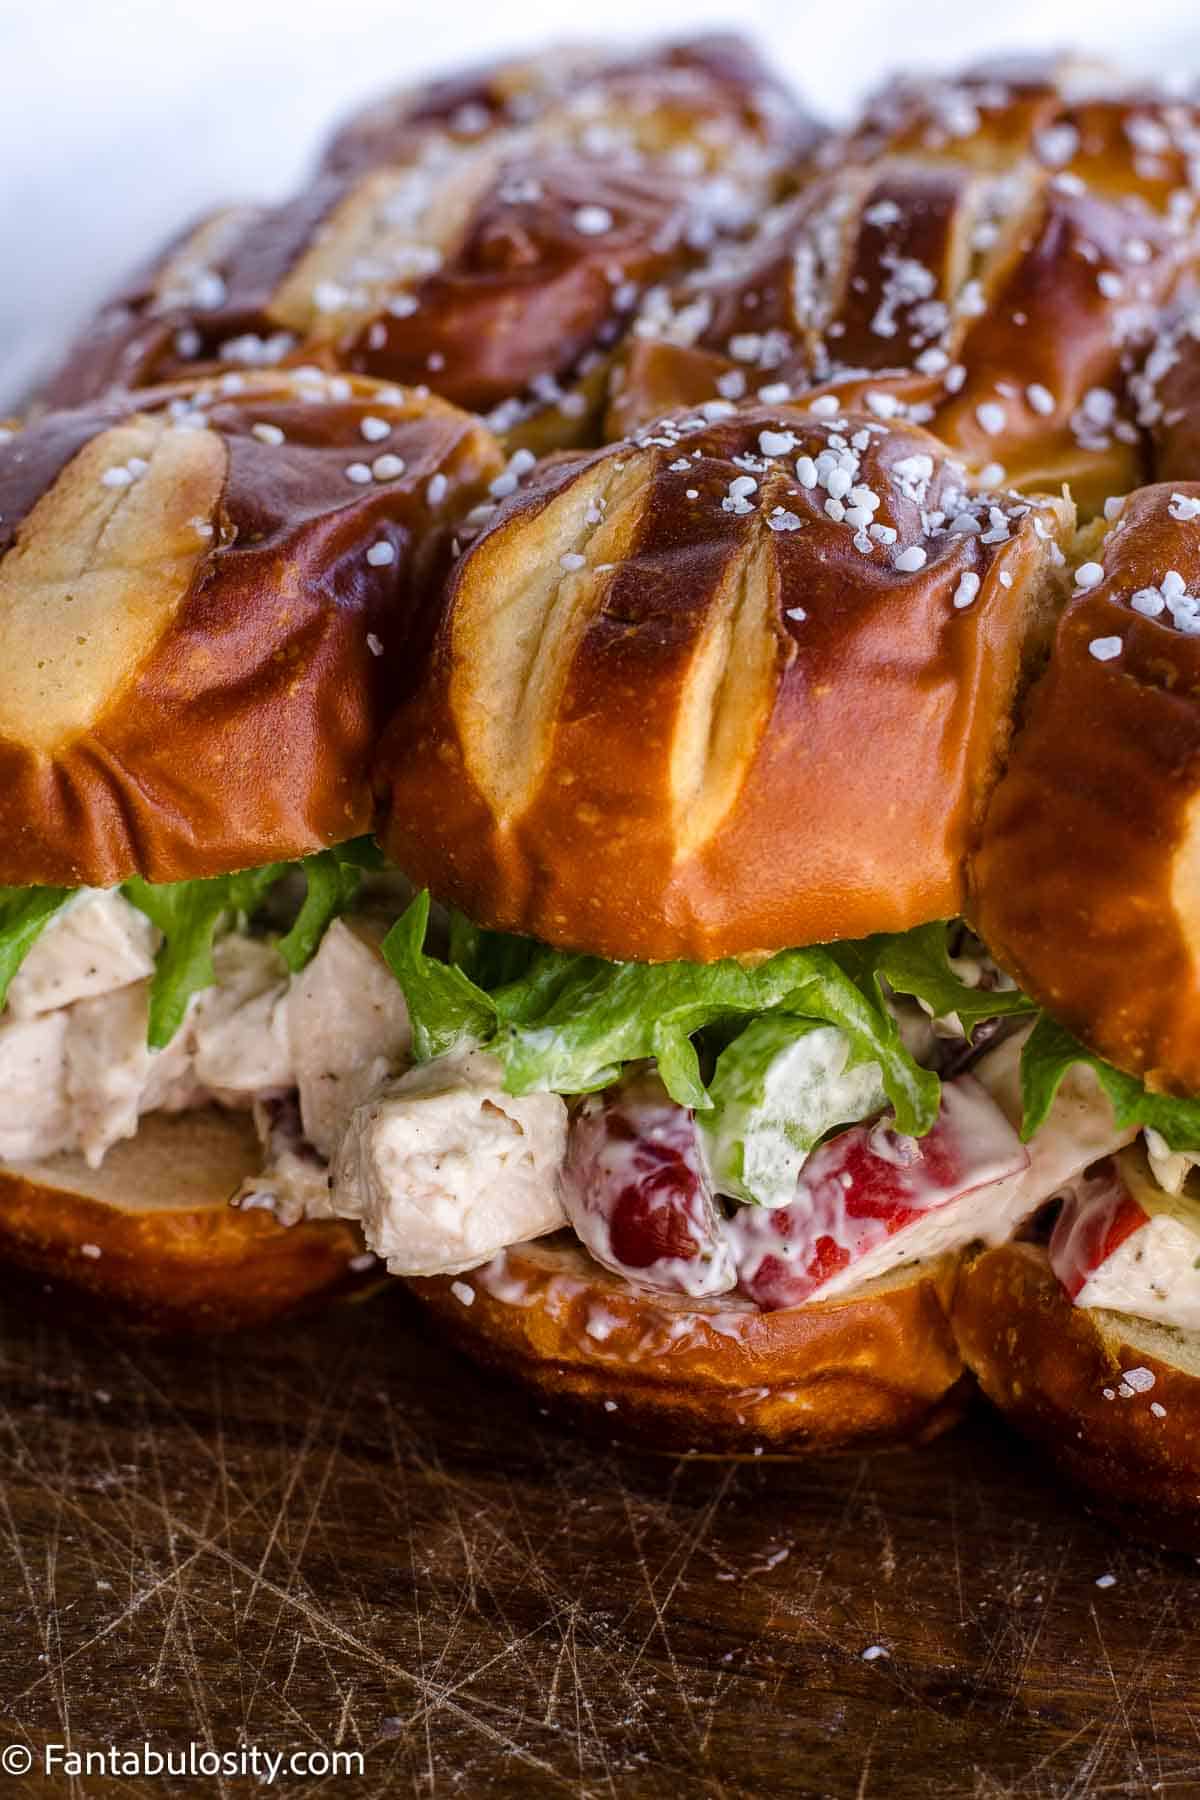 Chicken salad sliders with grapes and apples on a tray.